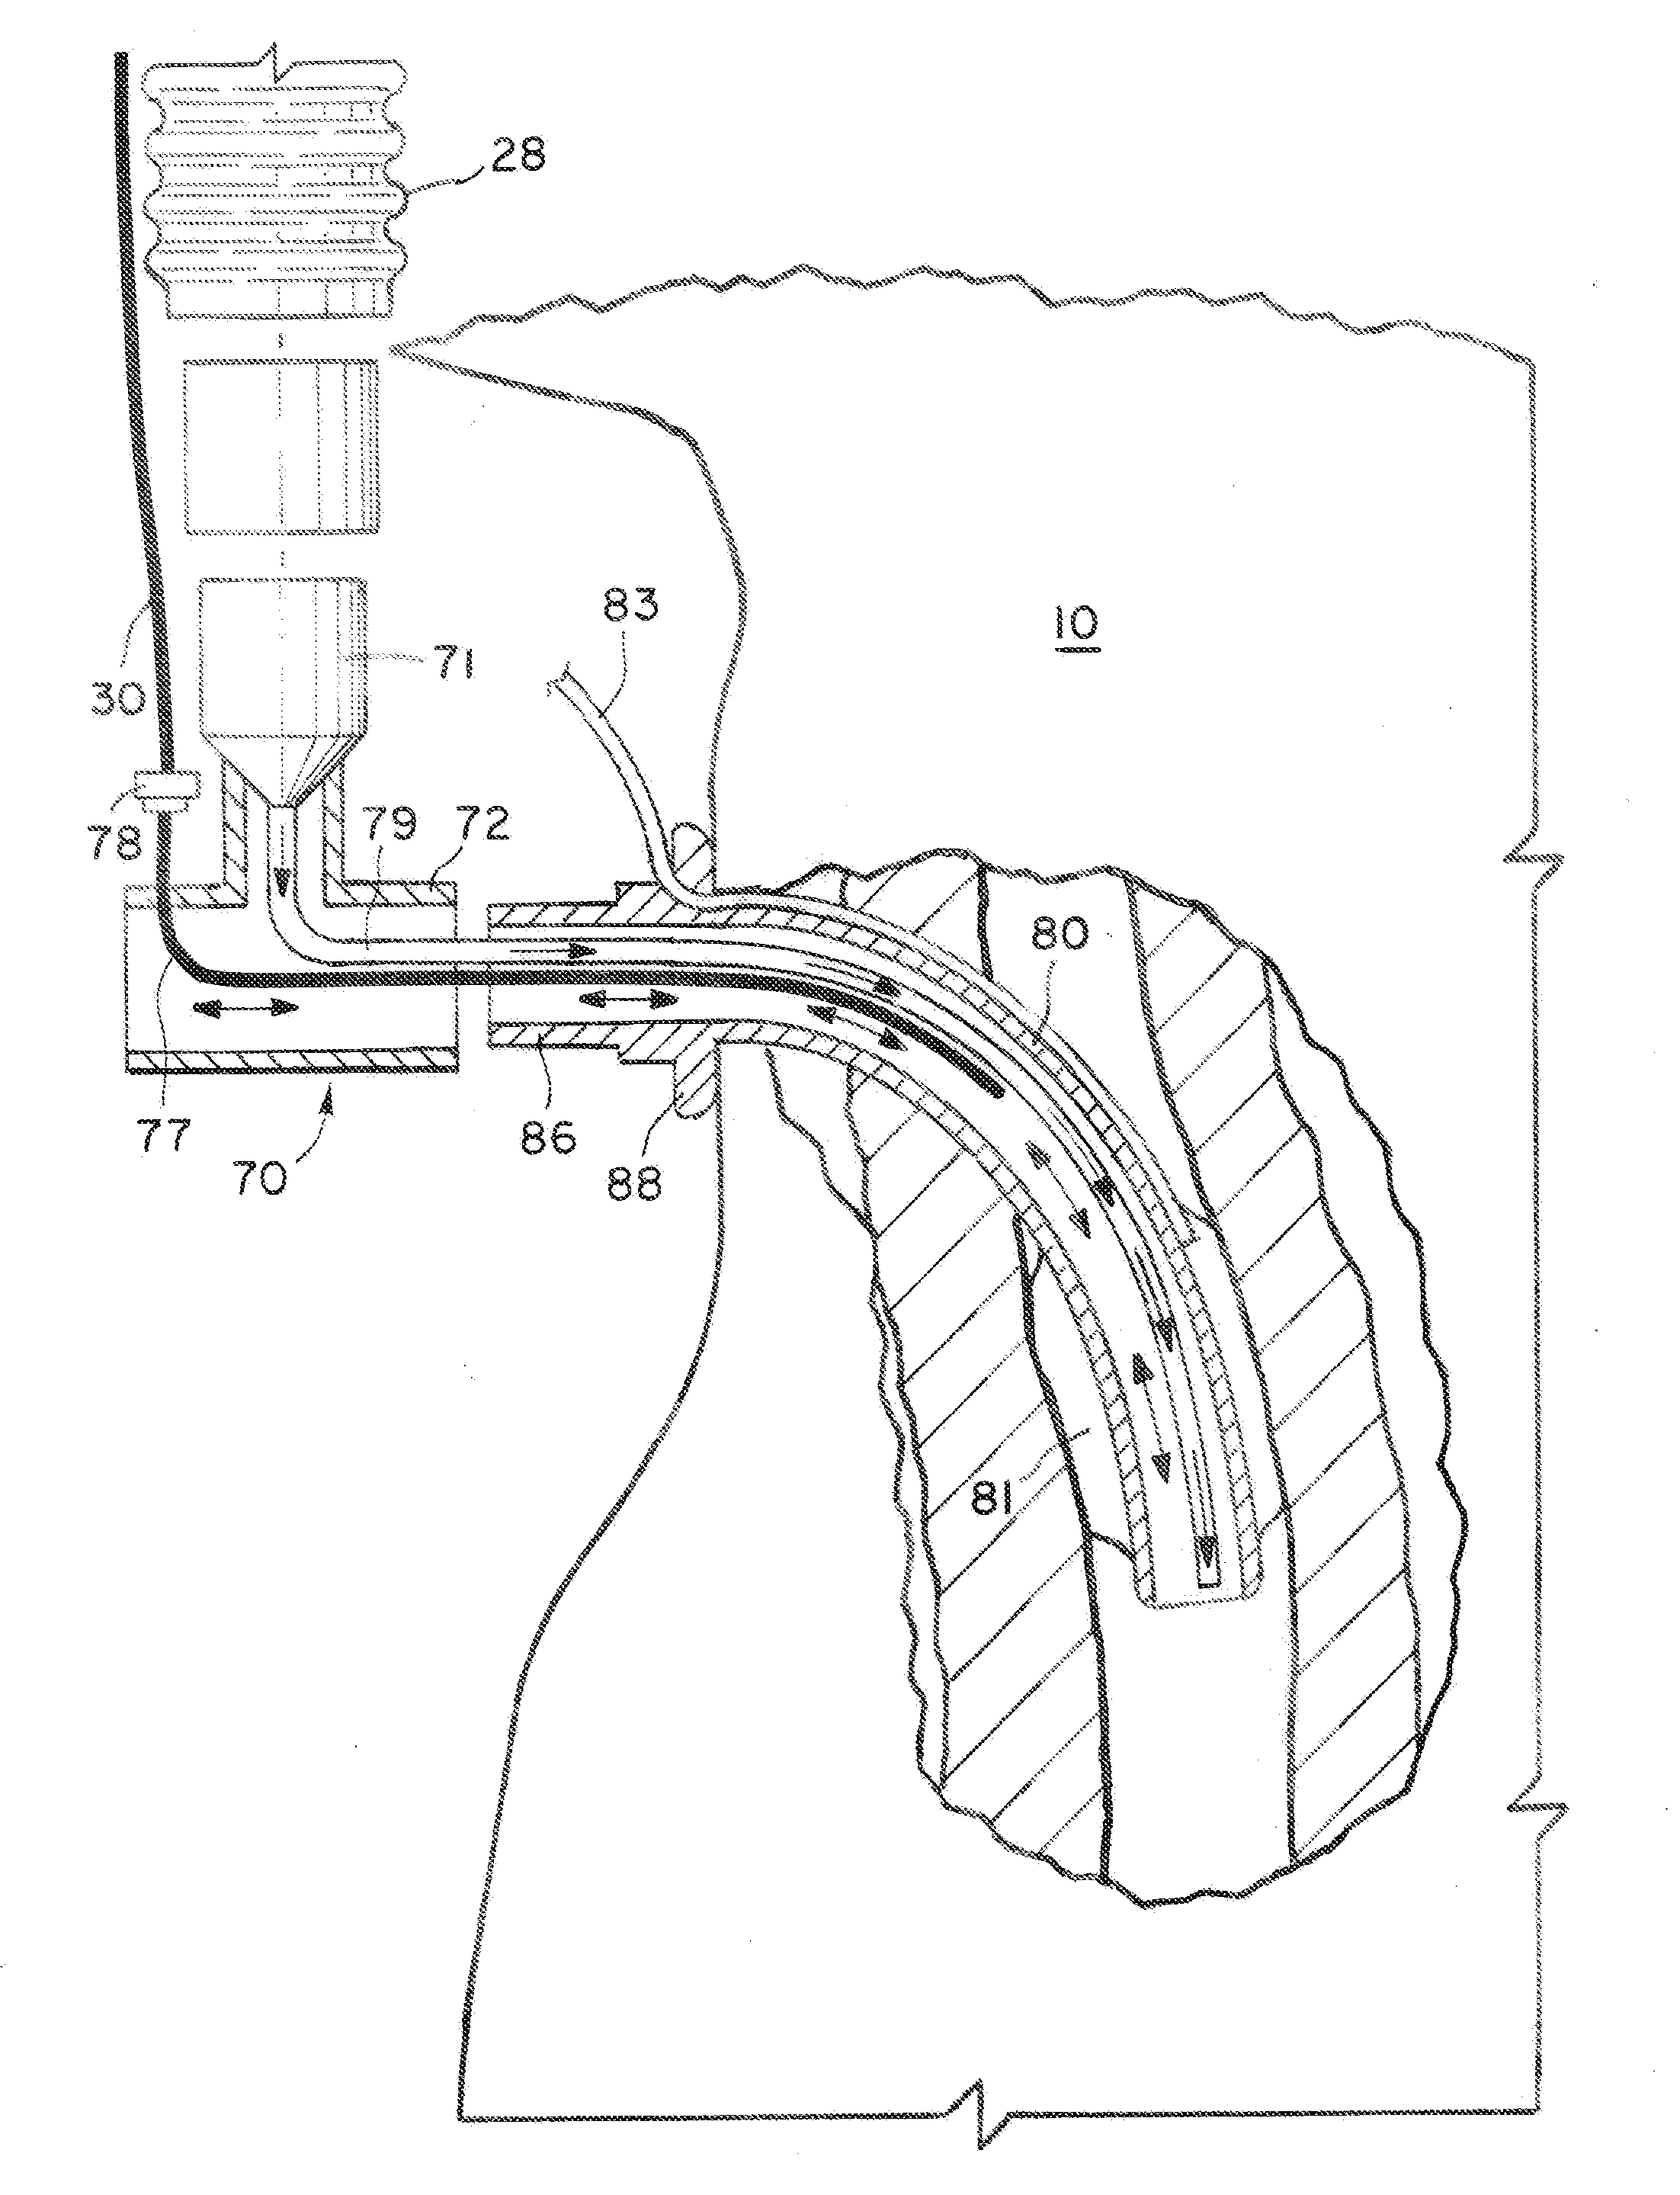 System for providing flow-targeted ventilation synchronized to a patient's breathing cycle